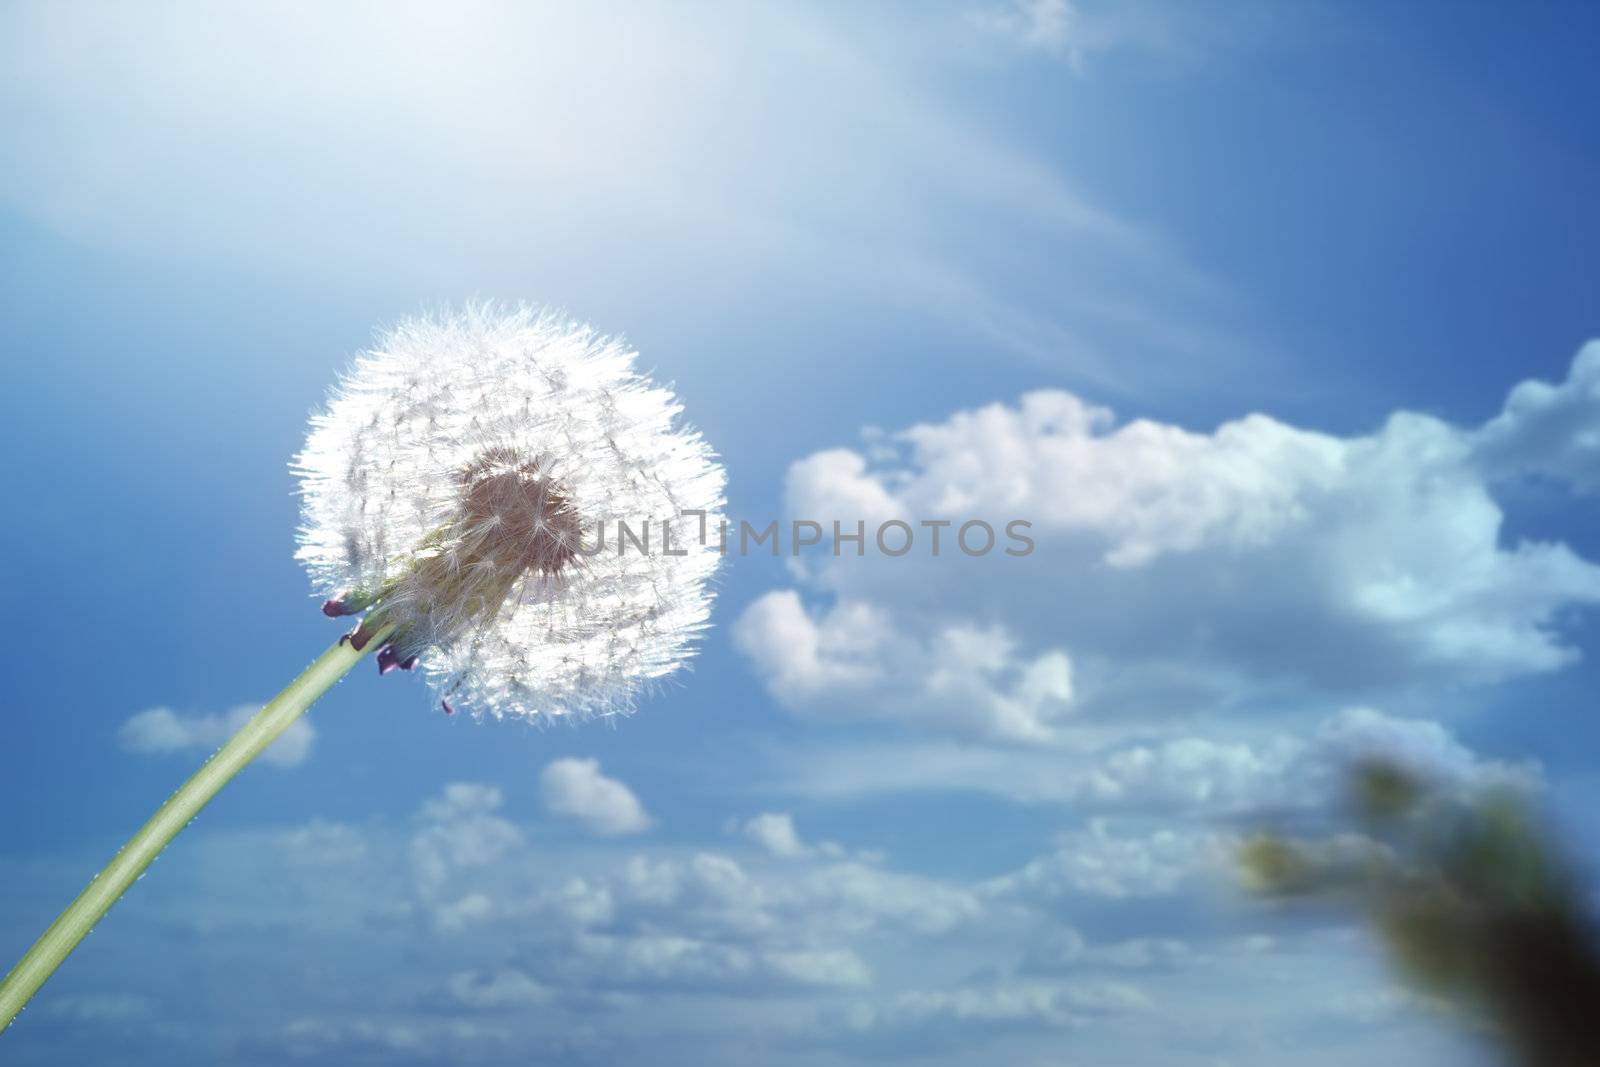 Dandelion on a sky background. Close-up photo with natural light and colors